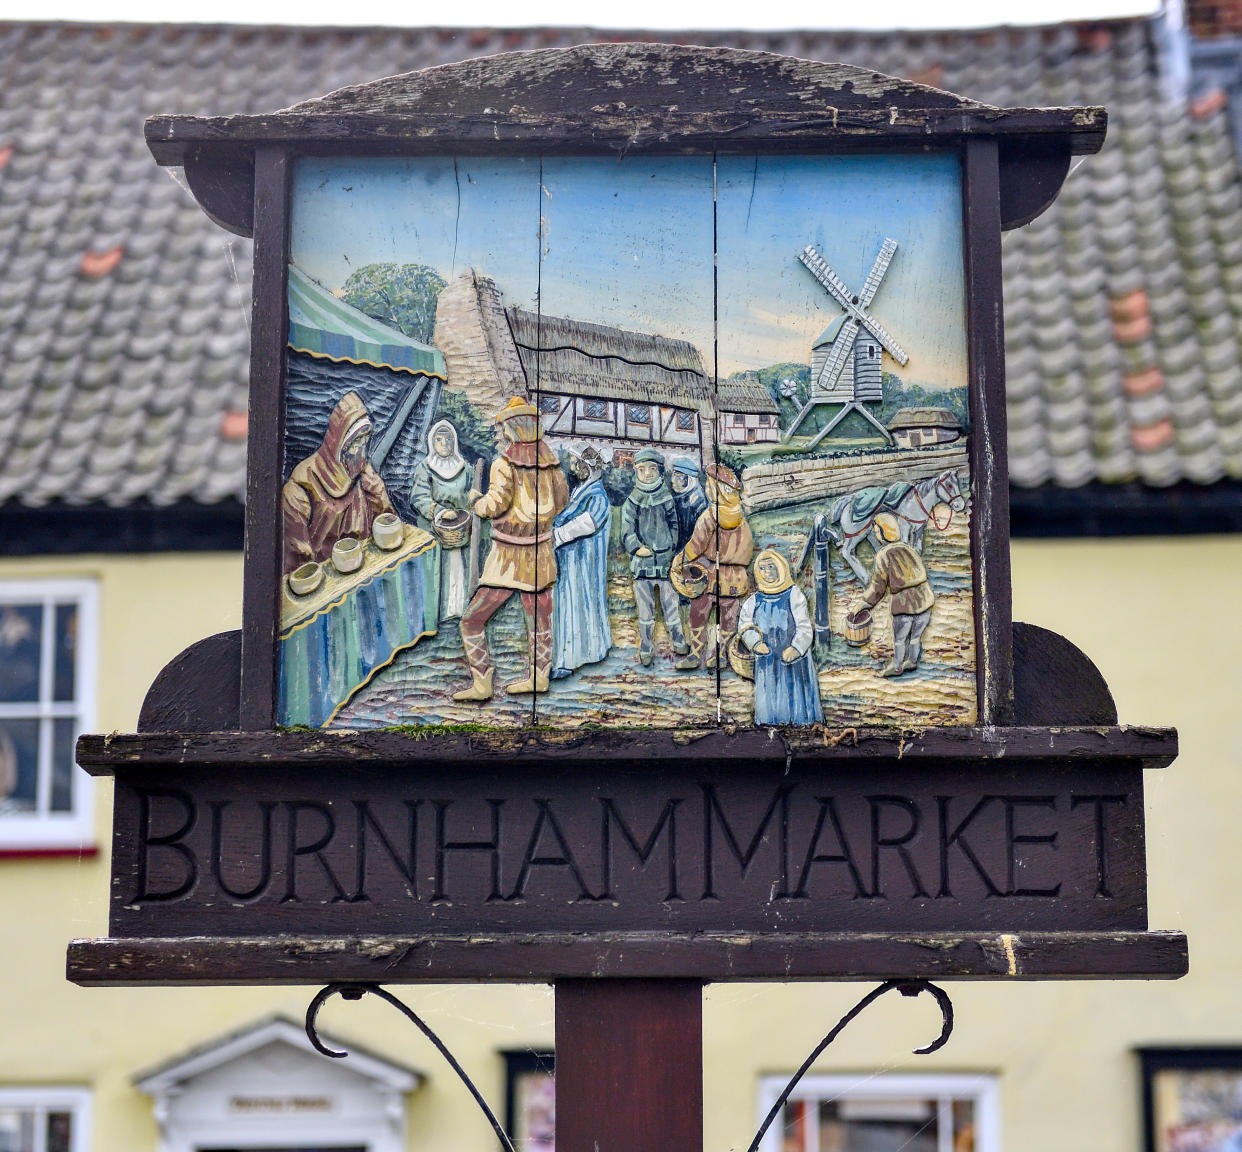 Burnham Market is dubbed ‘Chelsea on sea’ because of the large proportion of Londoners with property there. (SWNS)